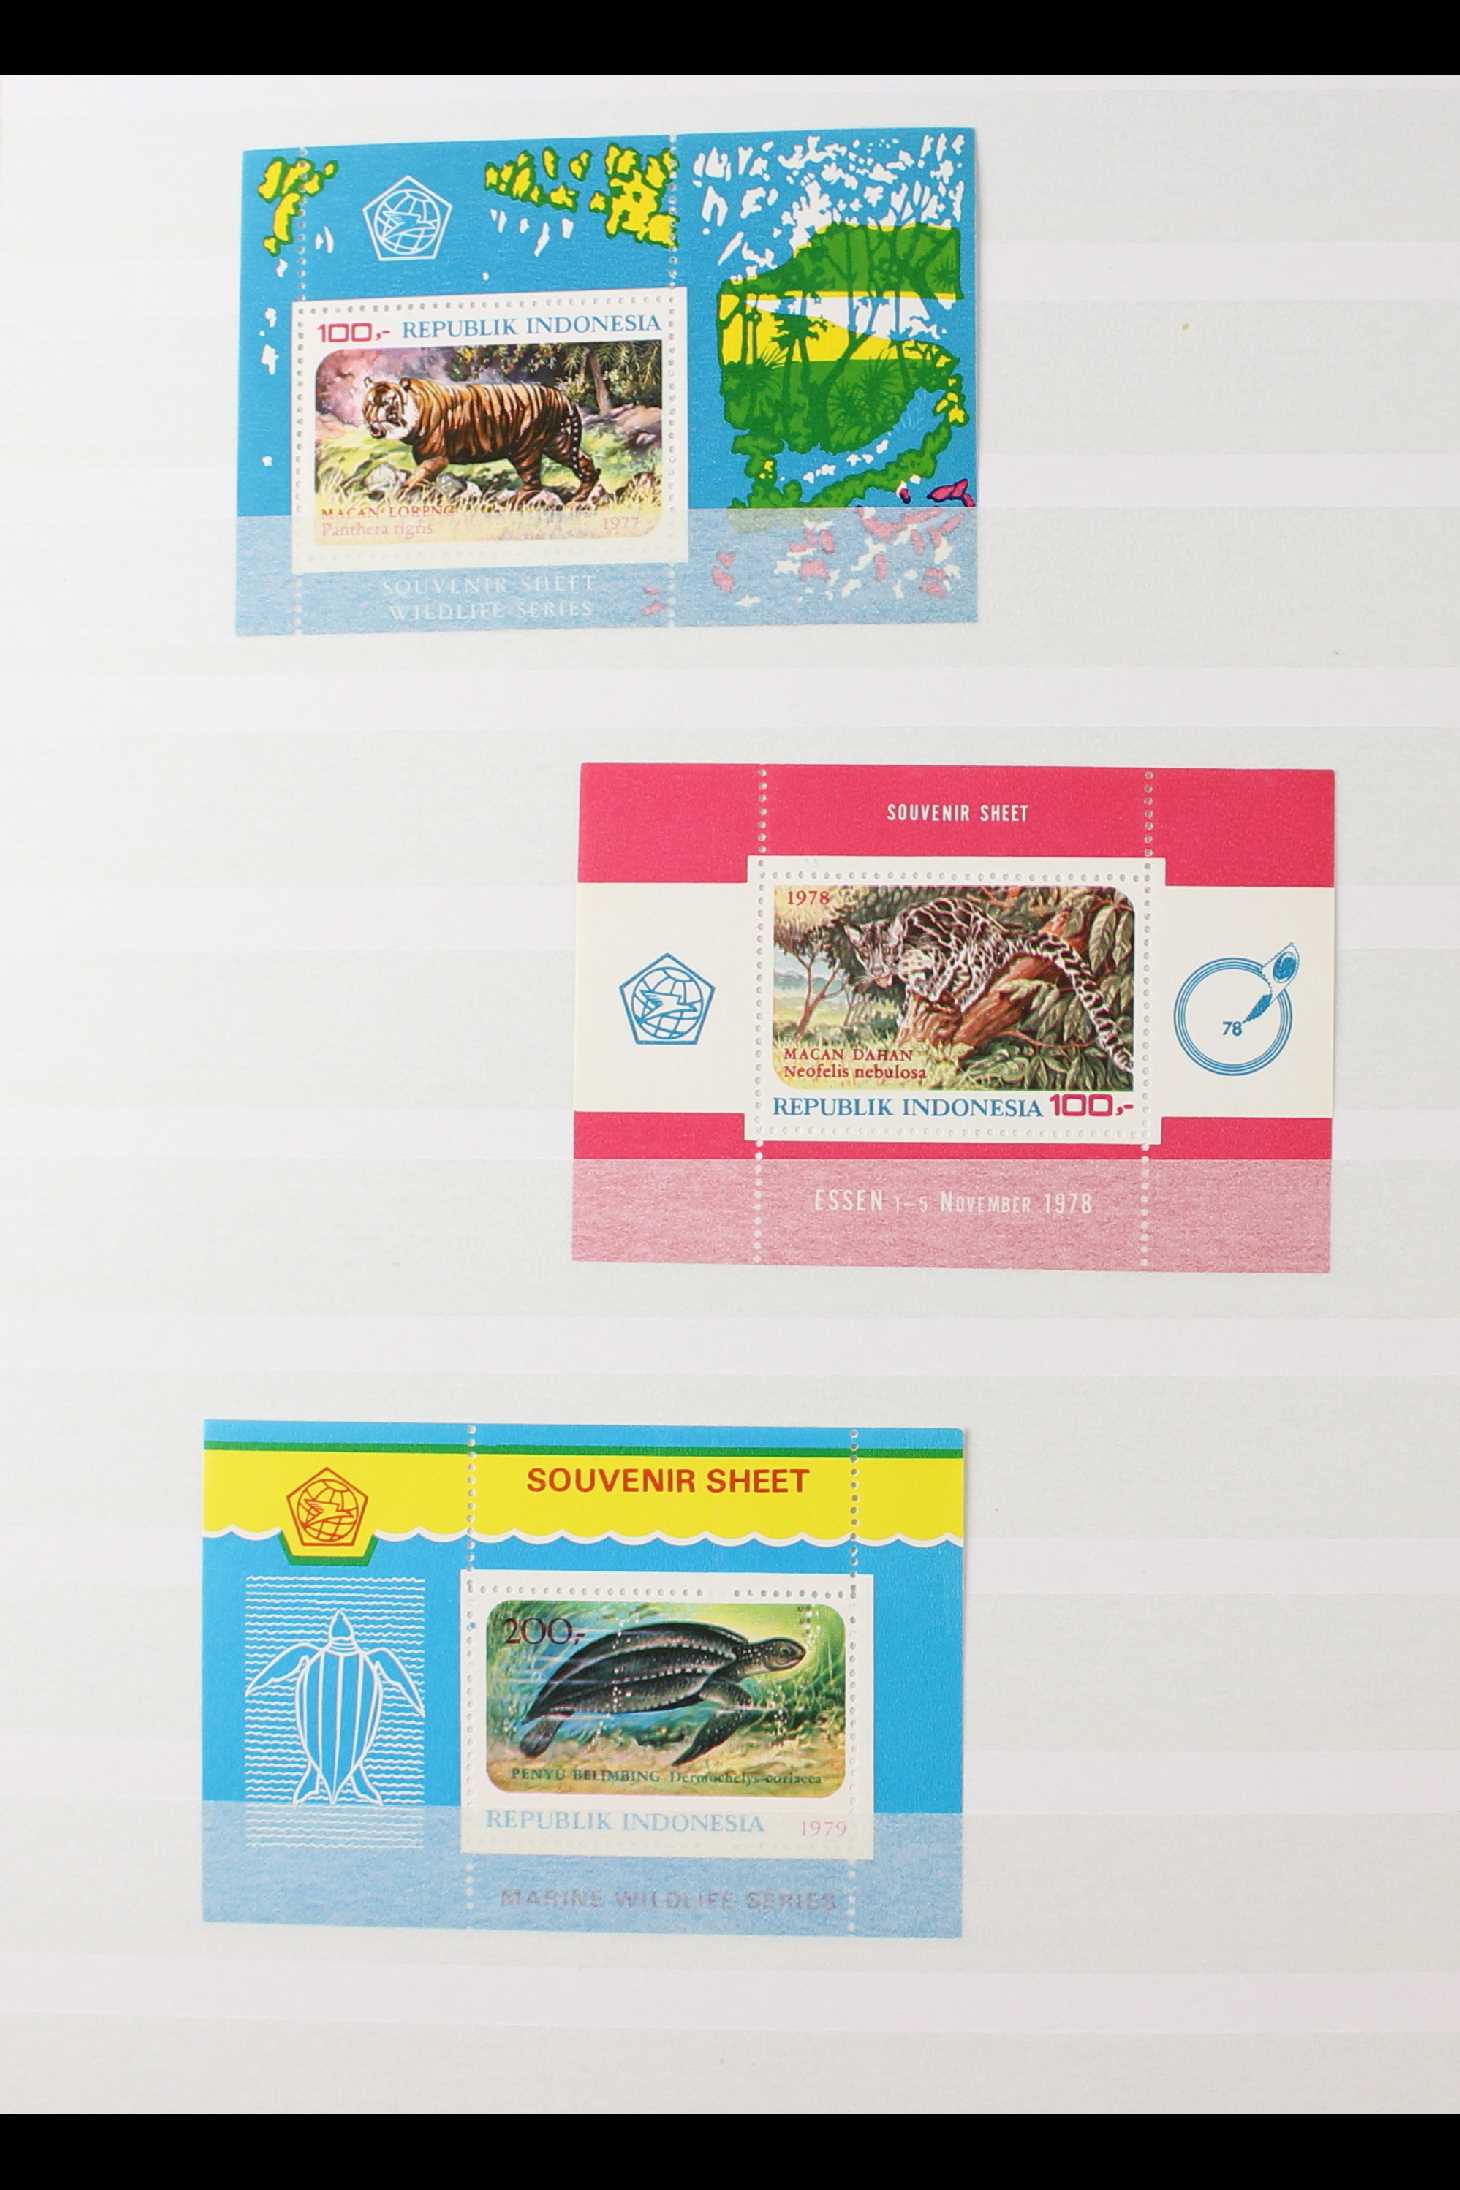 INDONESIA 1961-1981 MINIATURE SHEETS incl. 1971 Visit ASEAN Lands, 1971 444th Anniv of Djakarta, - Image 5 of 7